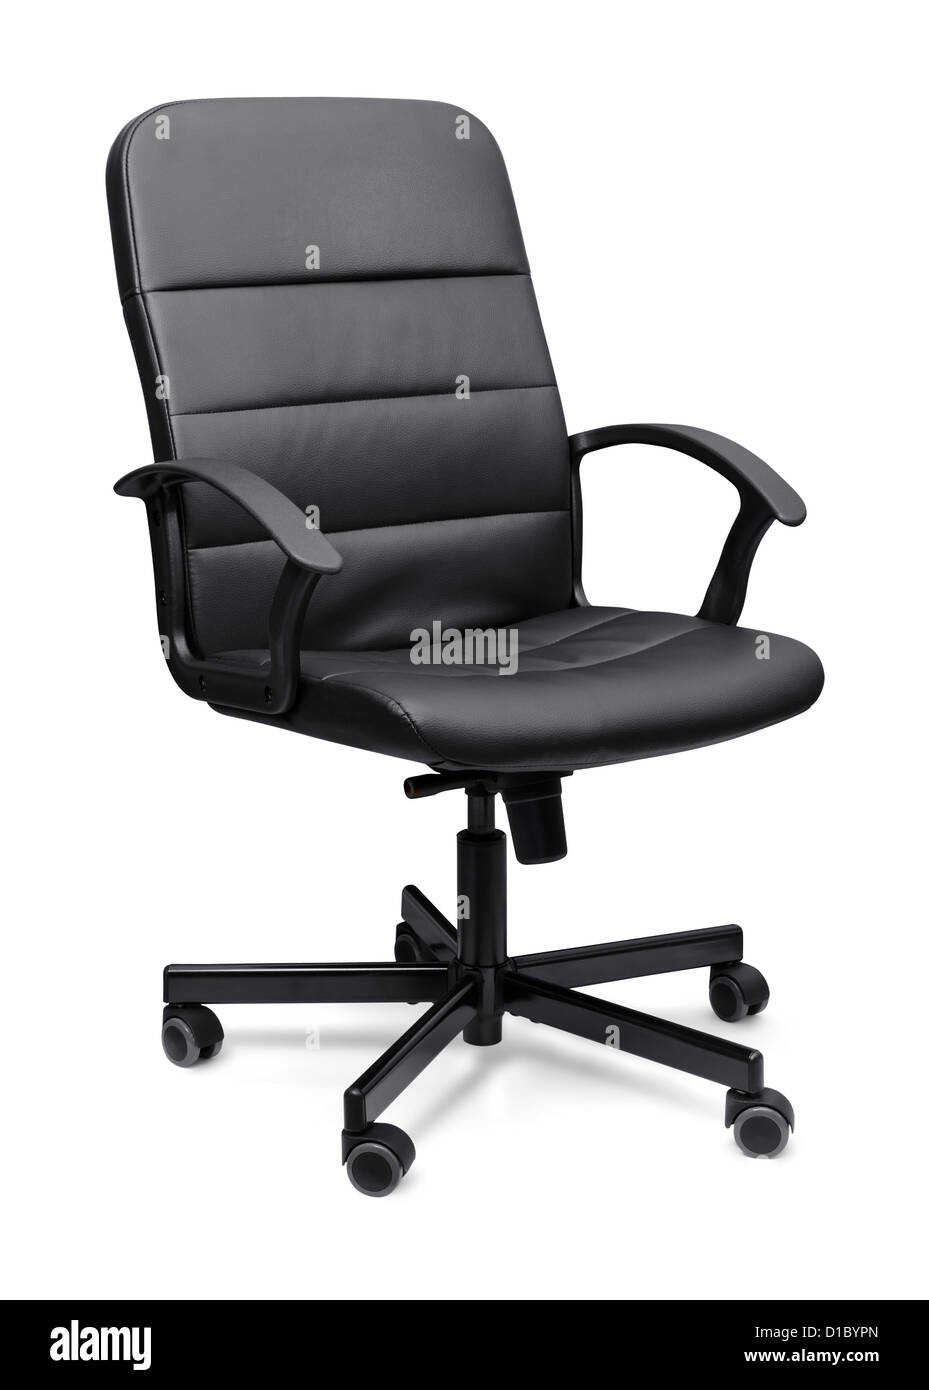 Black leather office chair isolated on whit Stock Photo